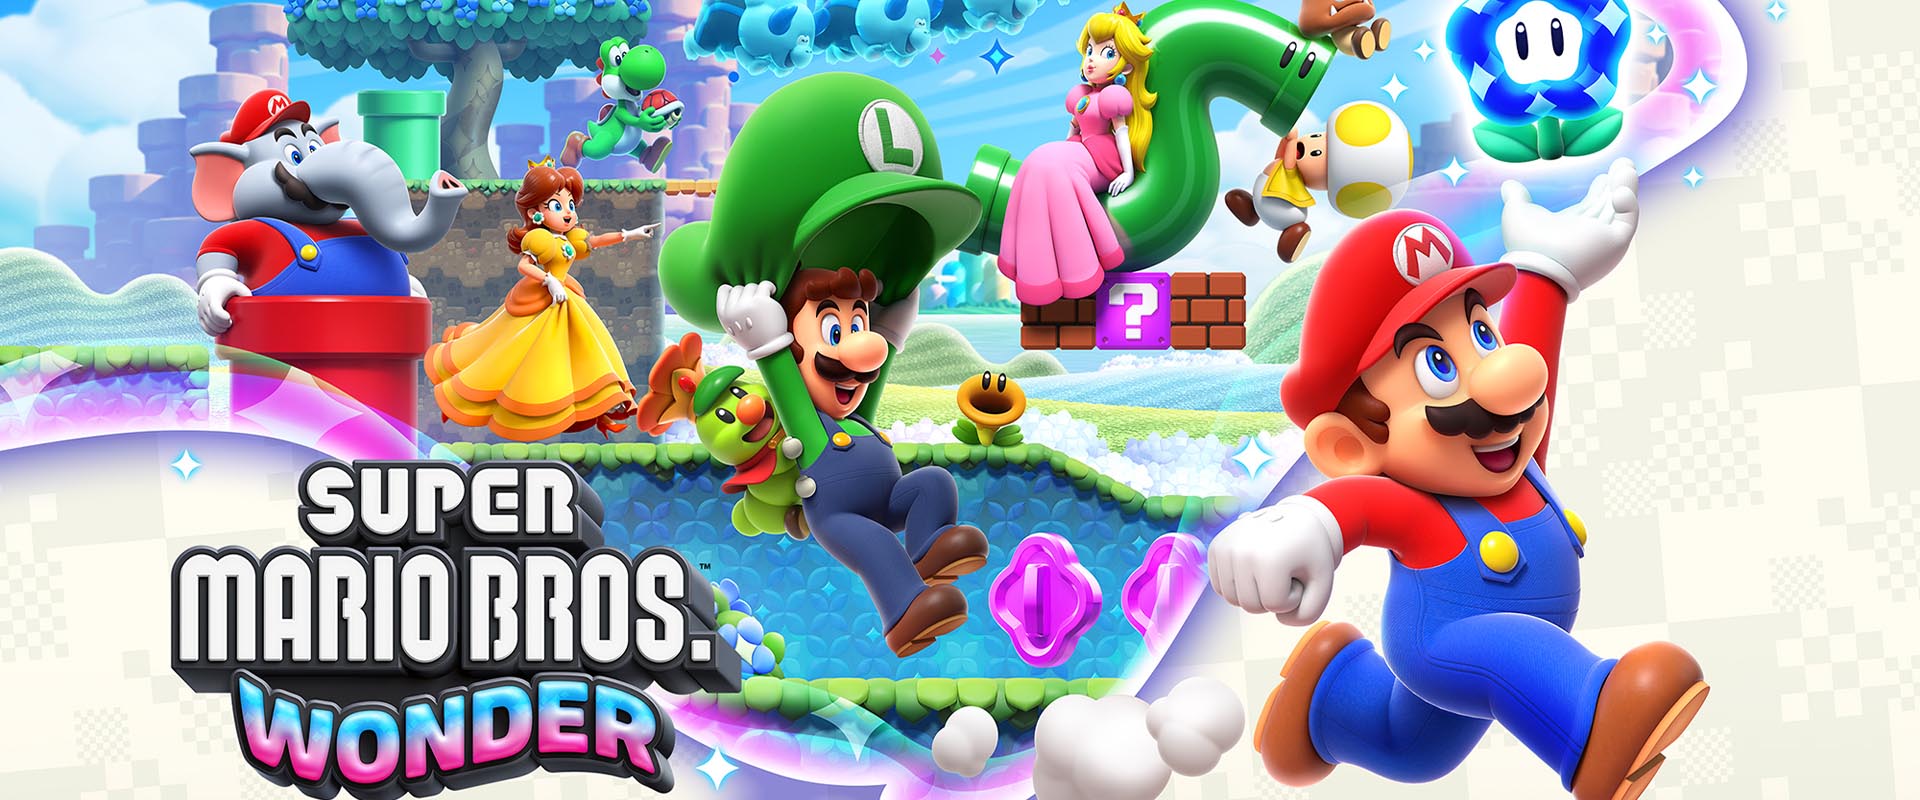 Who Can Survive the Longest in Mario Wonder?